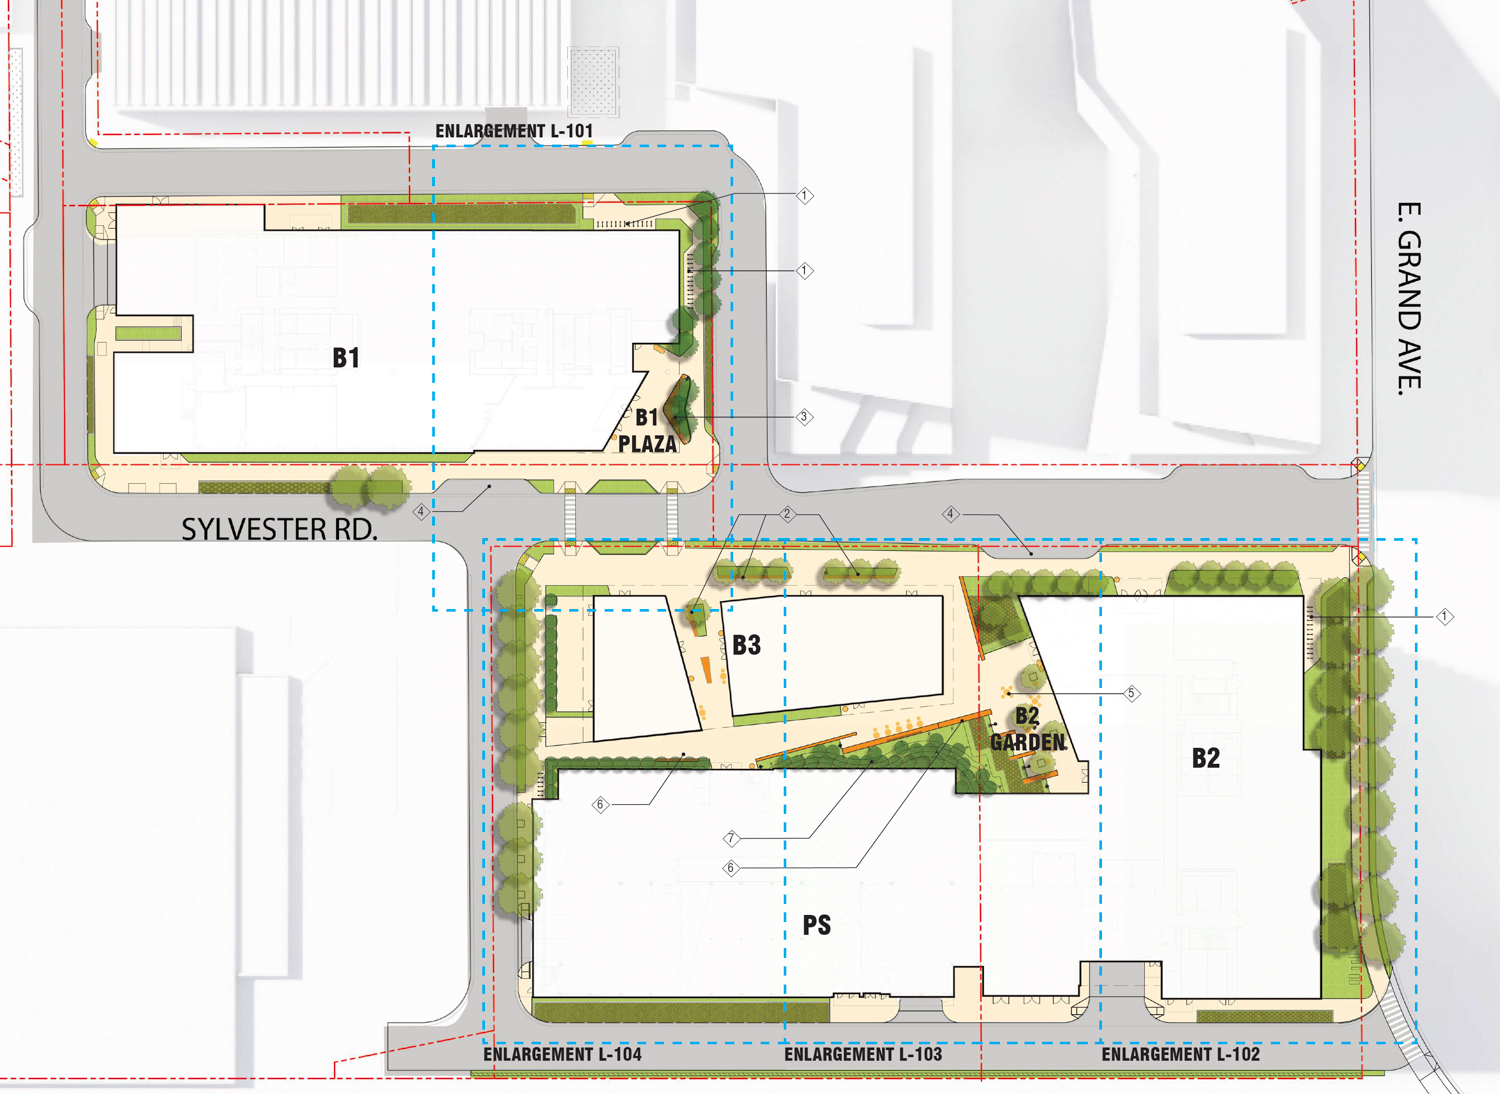 120 East Grand Avenue site map, illustration by Bionic